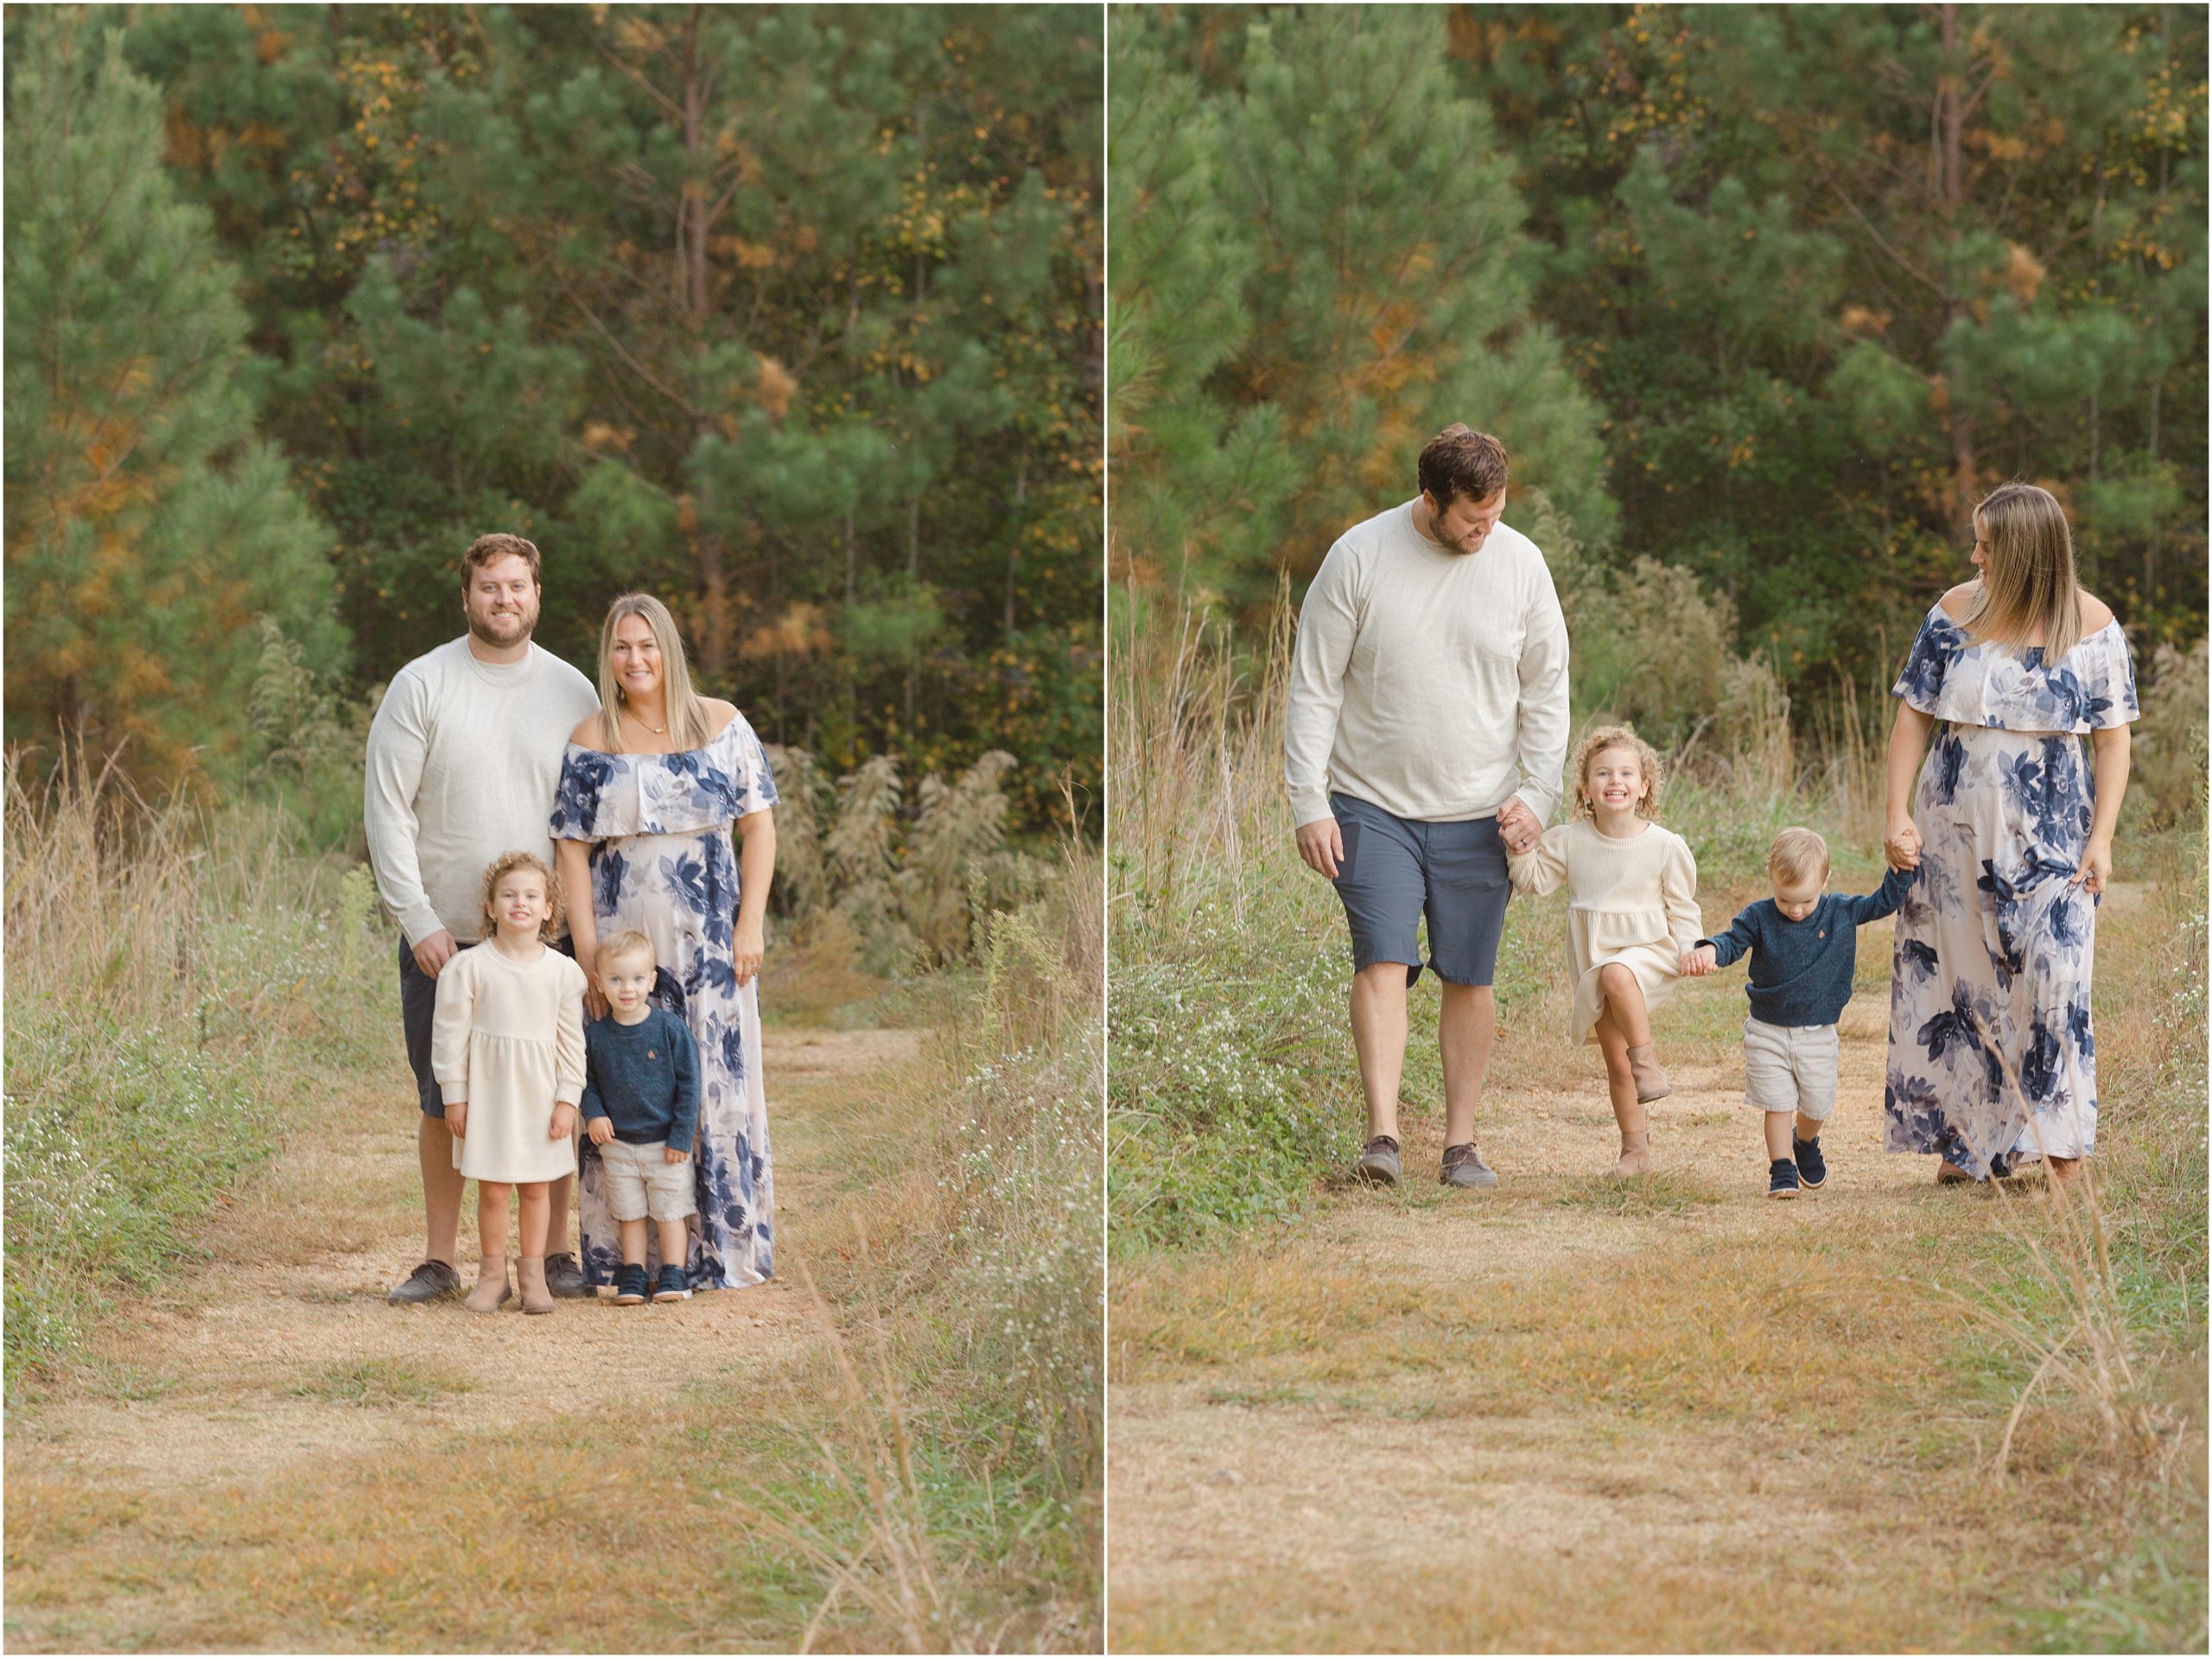 Raleigh Family Photography | Christy Johnson Photography